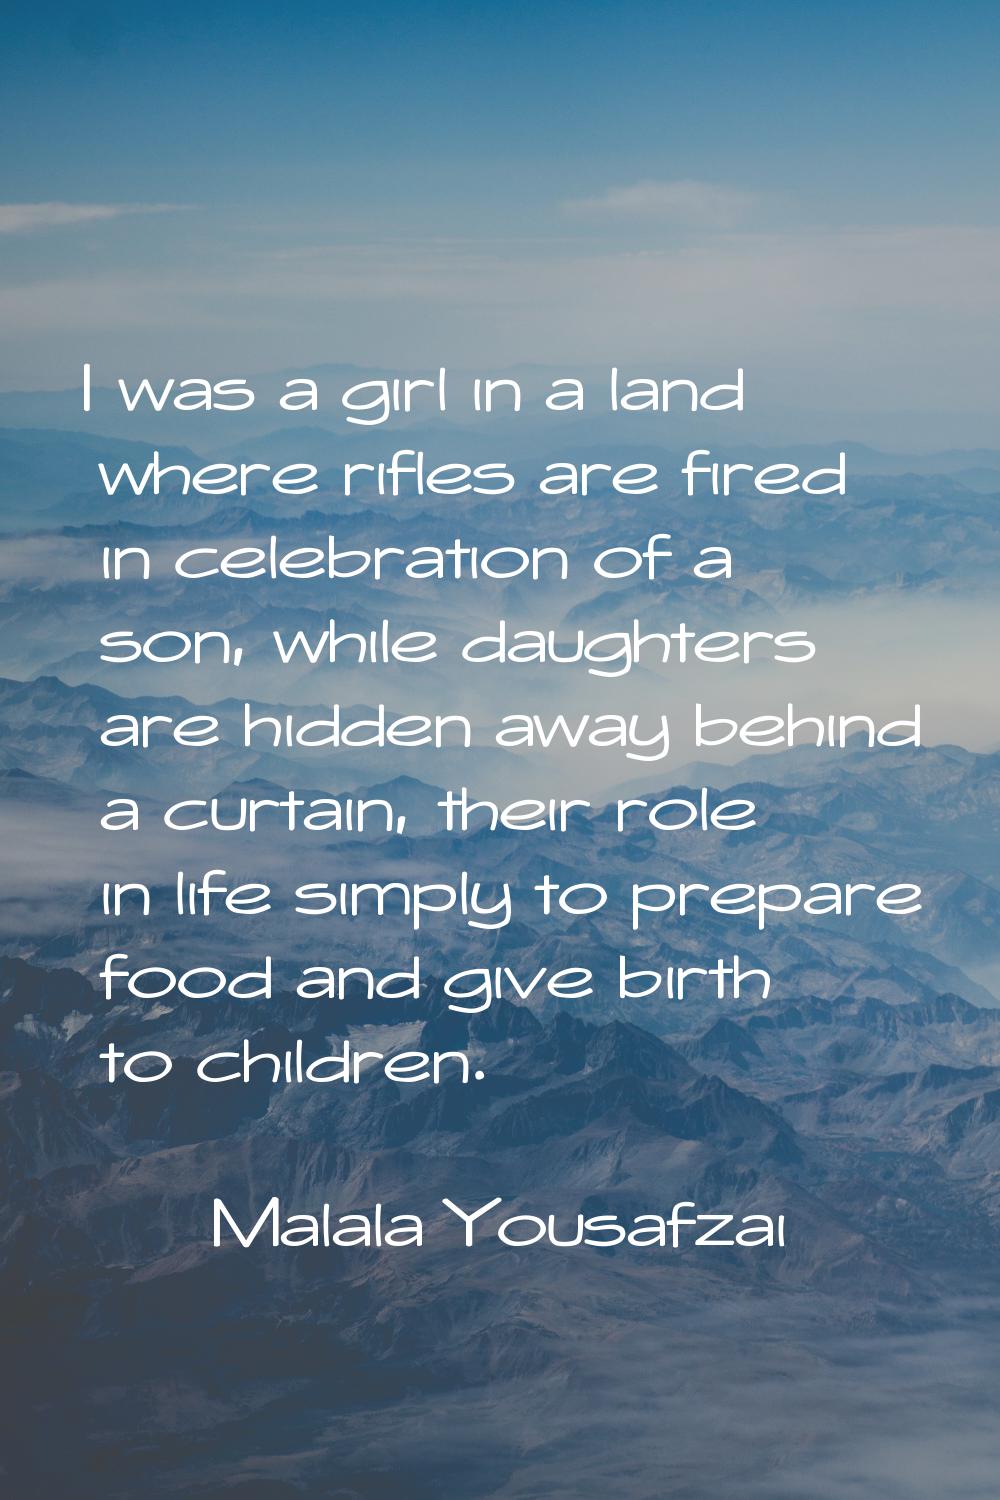 I was a girl in a land where rifles are fired in celebration of a son, while daughters are hidden a